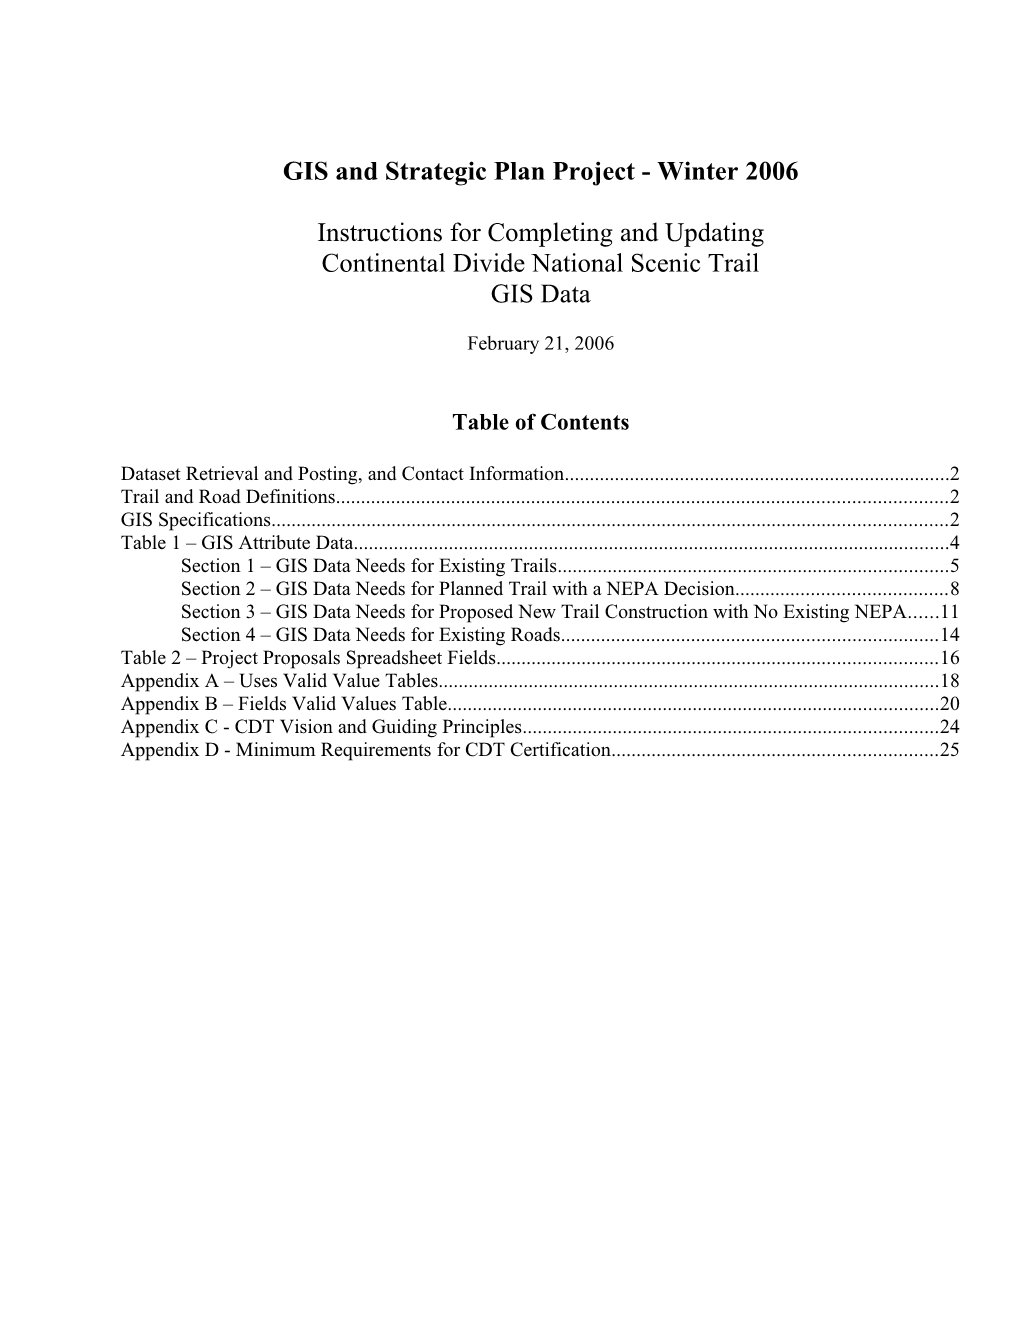 GIS and Strategic Plan Project - Winter 2006